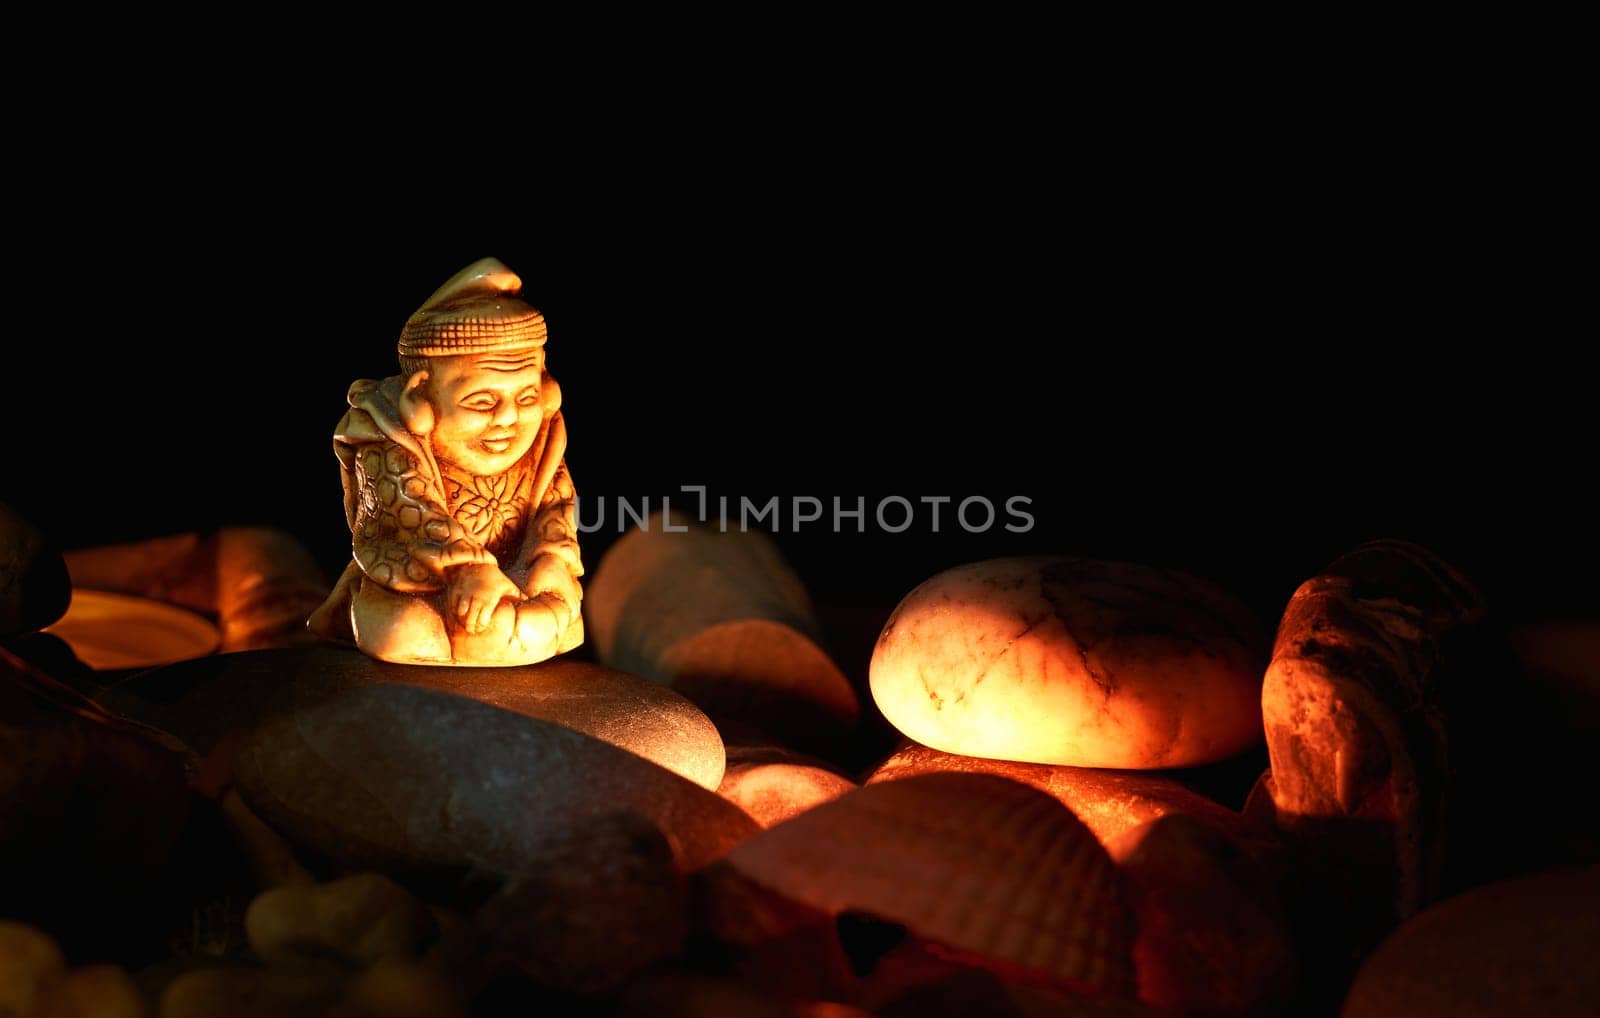 A serene calm monk meditates by the fire in darkness of the night among stones by jovani68